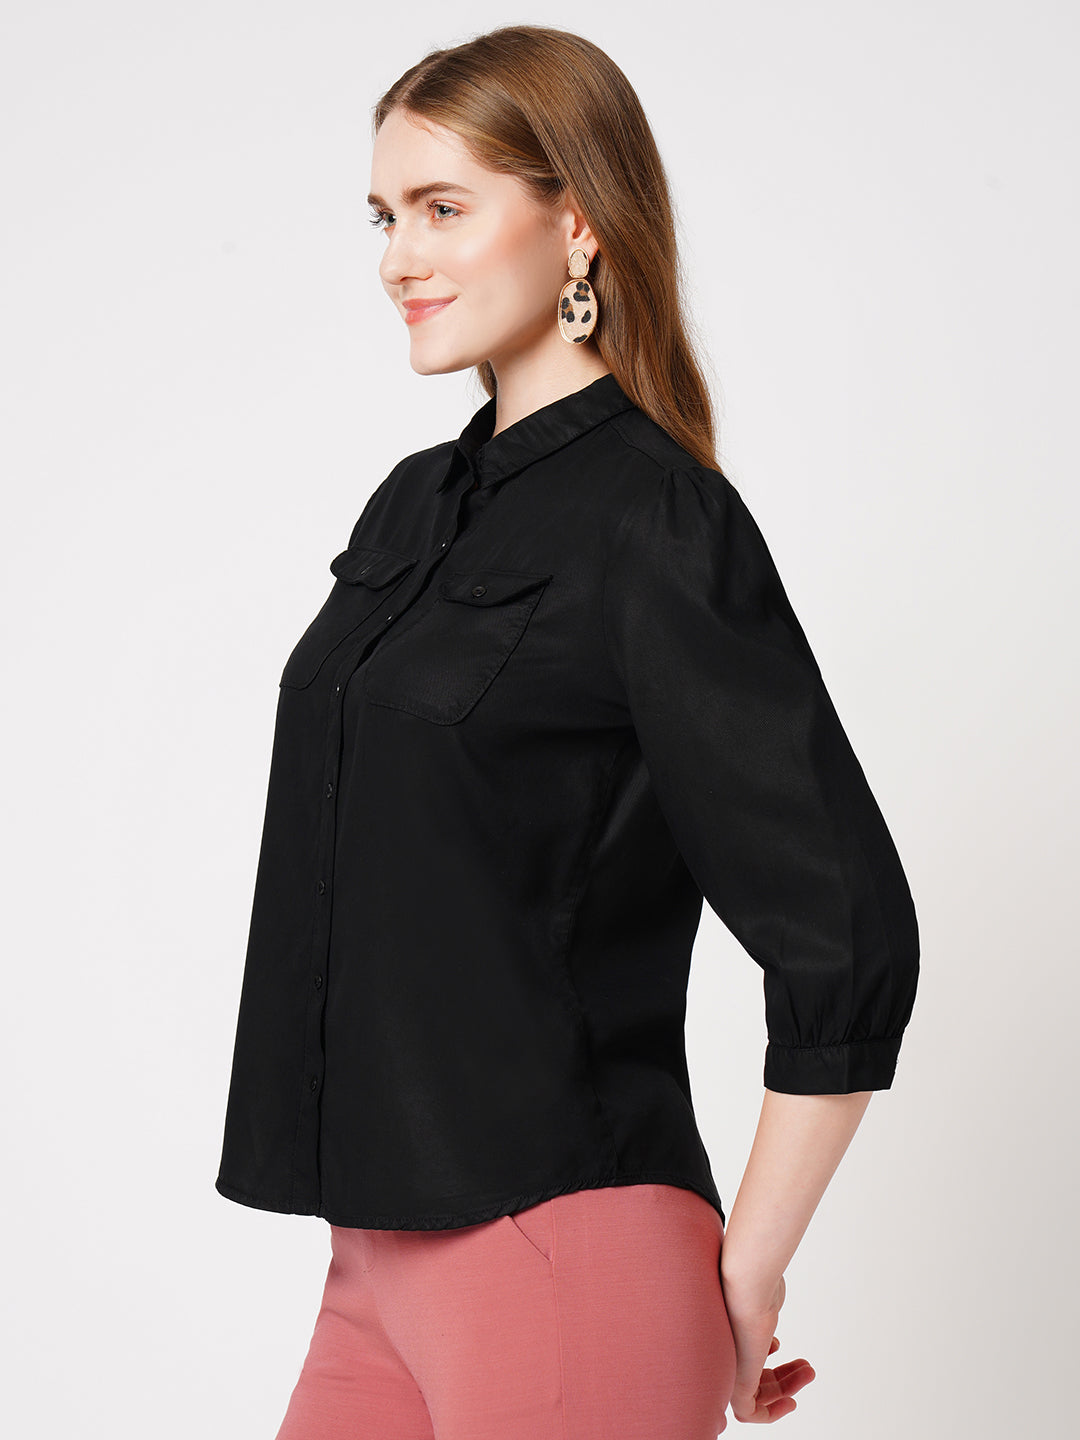 Women Solid Casual Slim Fit Shirt